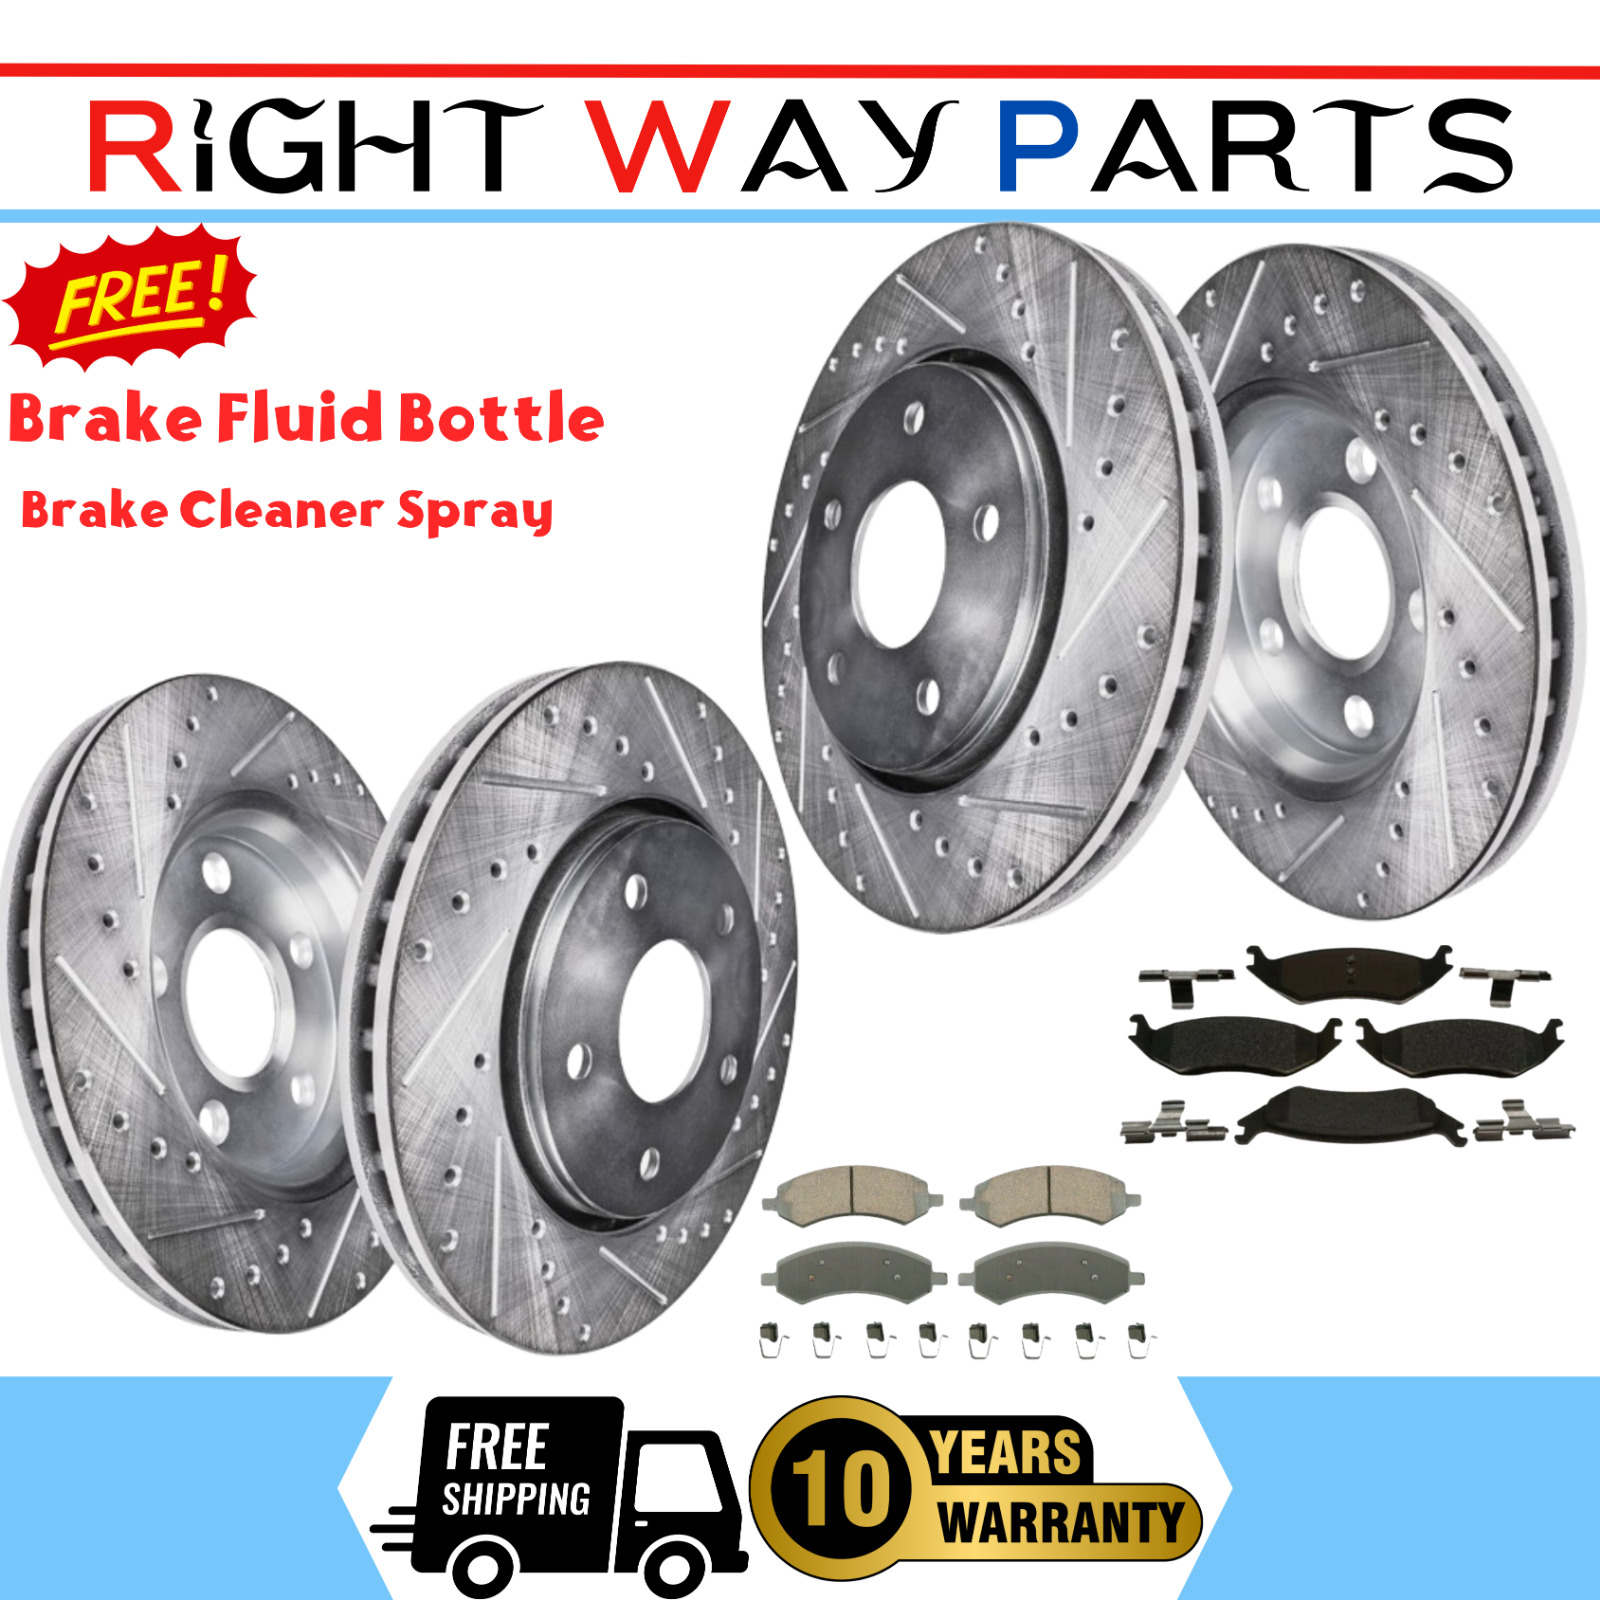 Front Rear Drilled Rotors Brake Pads for 2004 2005 Dodge Ram 1500 Durango 5 Lugs